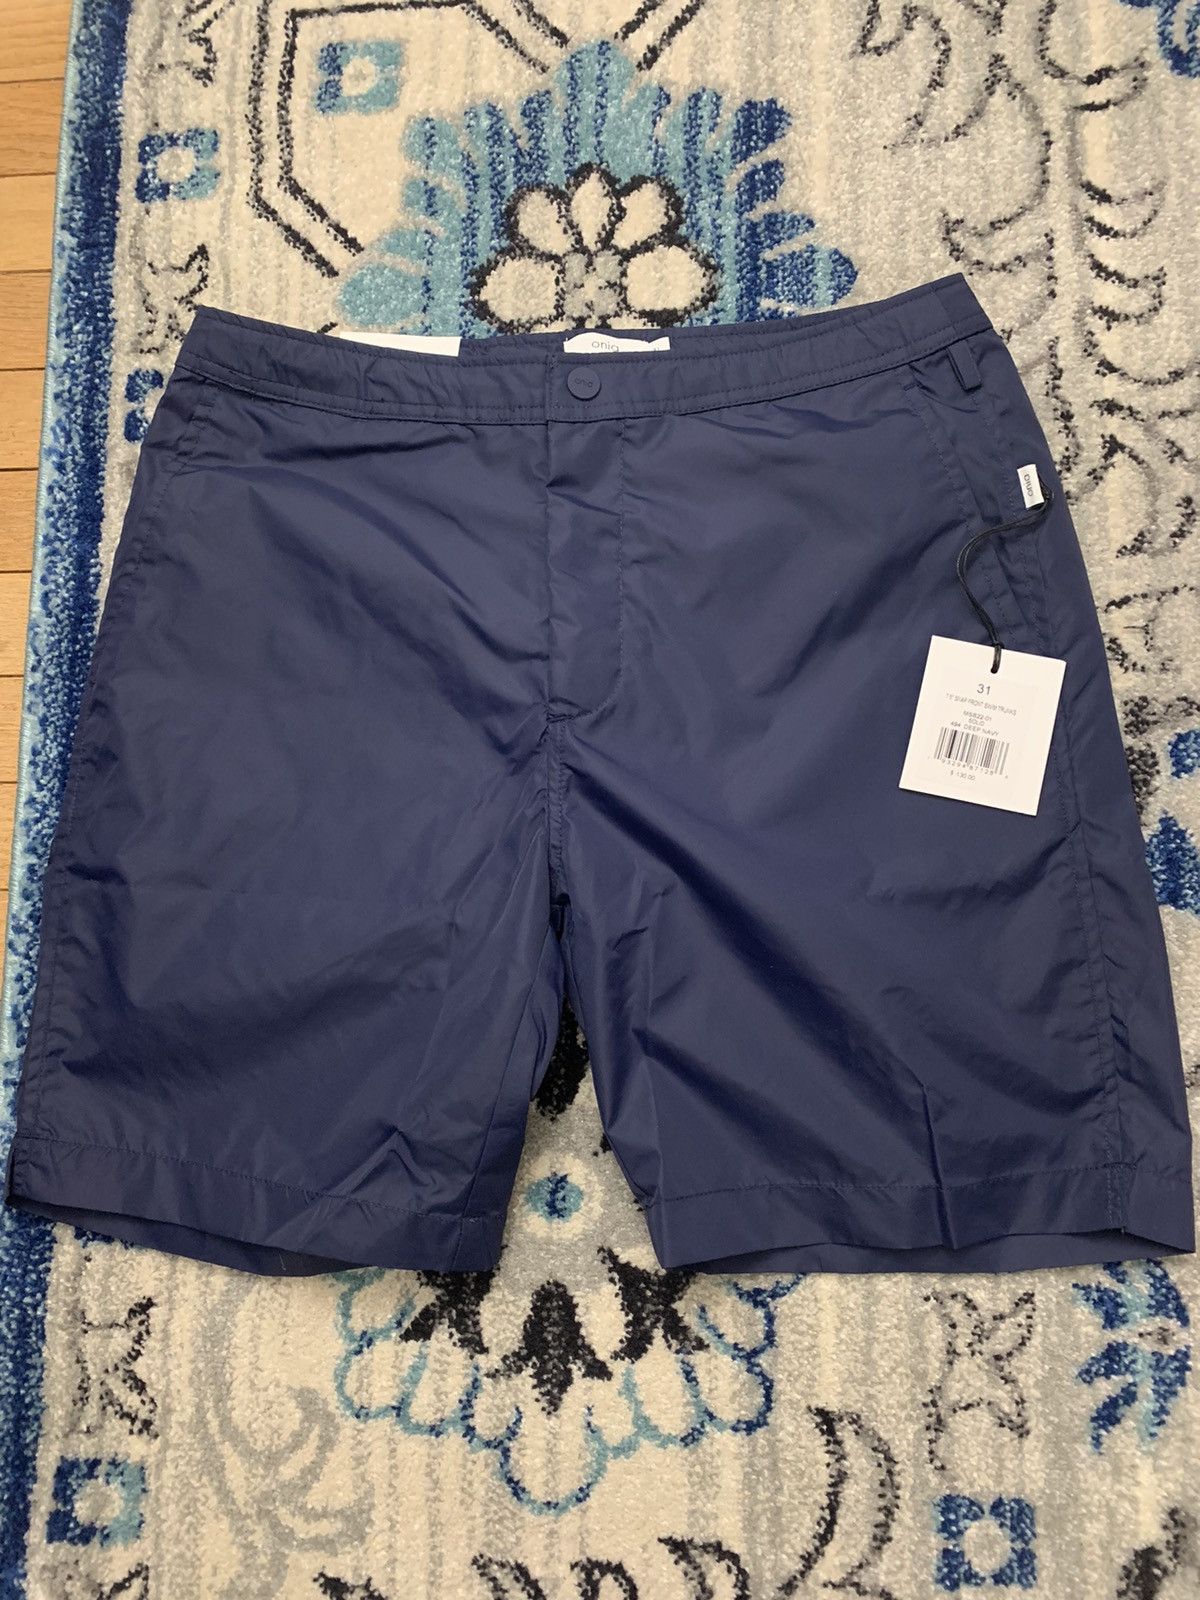 Onia 7.5 Inch Snap-Front Swim Trunks | Grailed